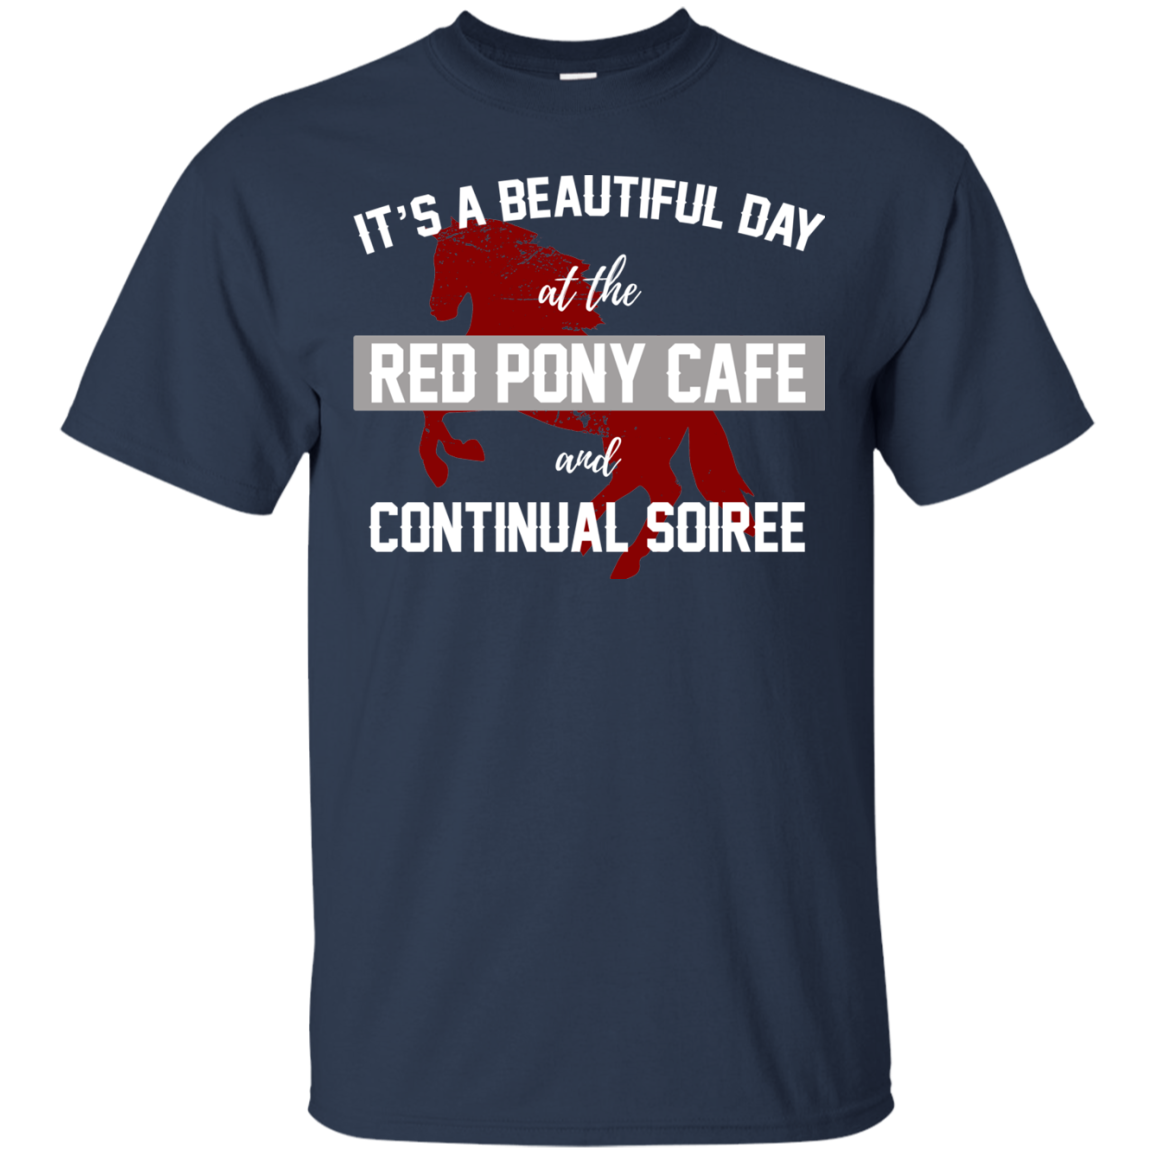 red pony cafe t shirt